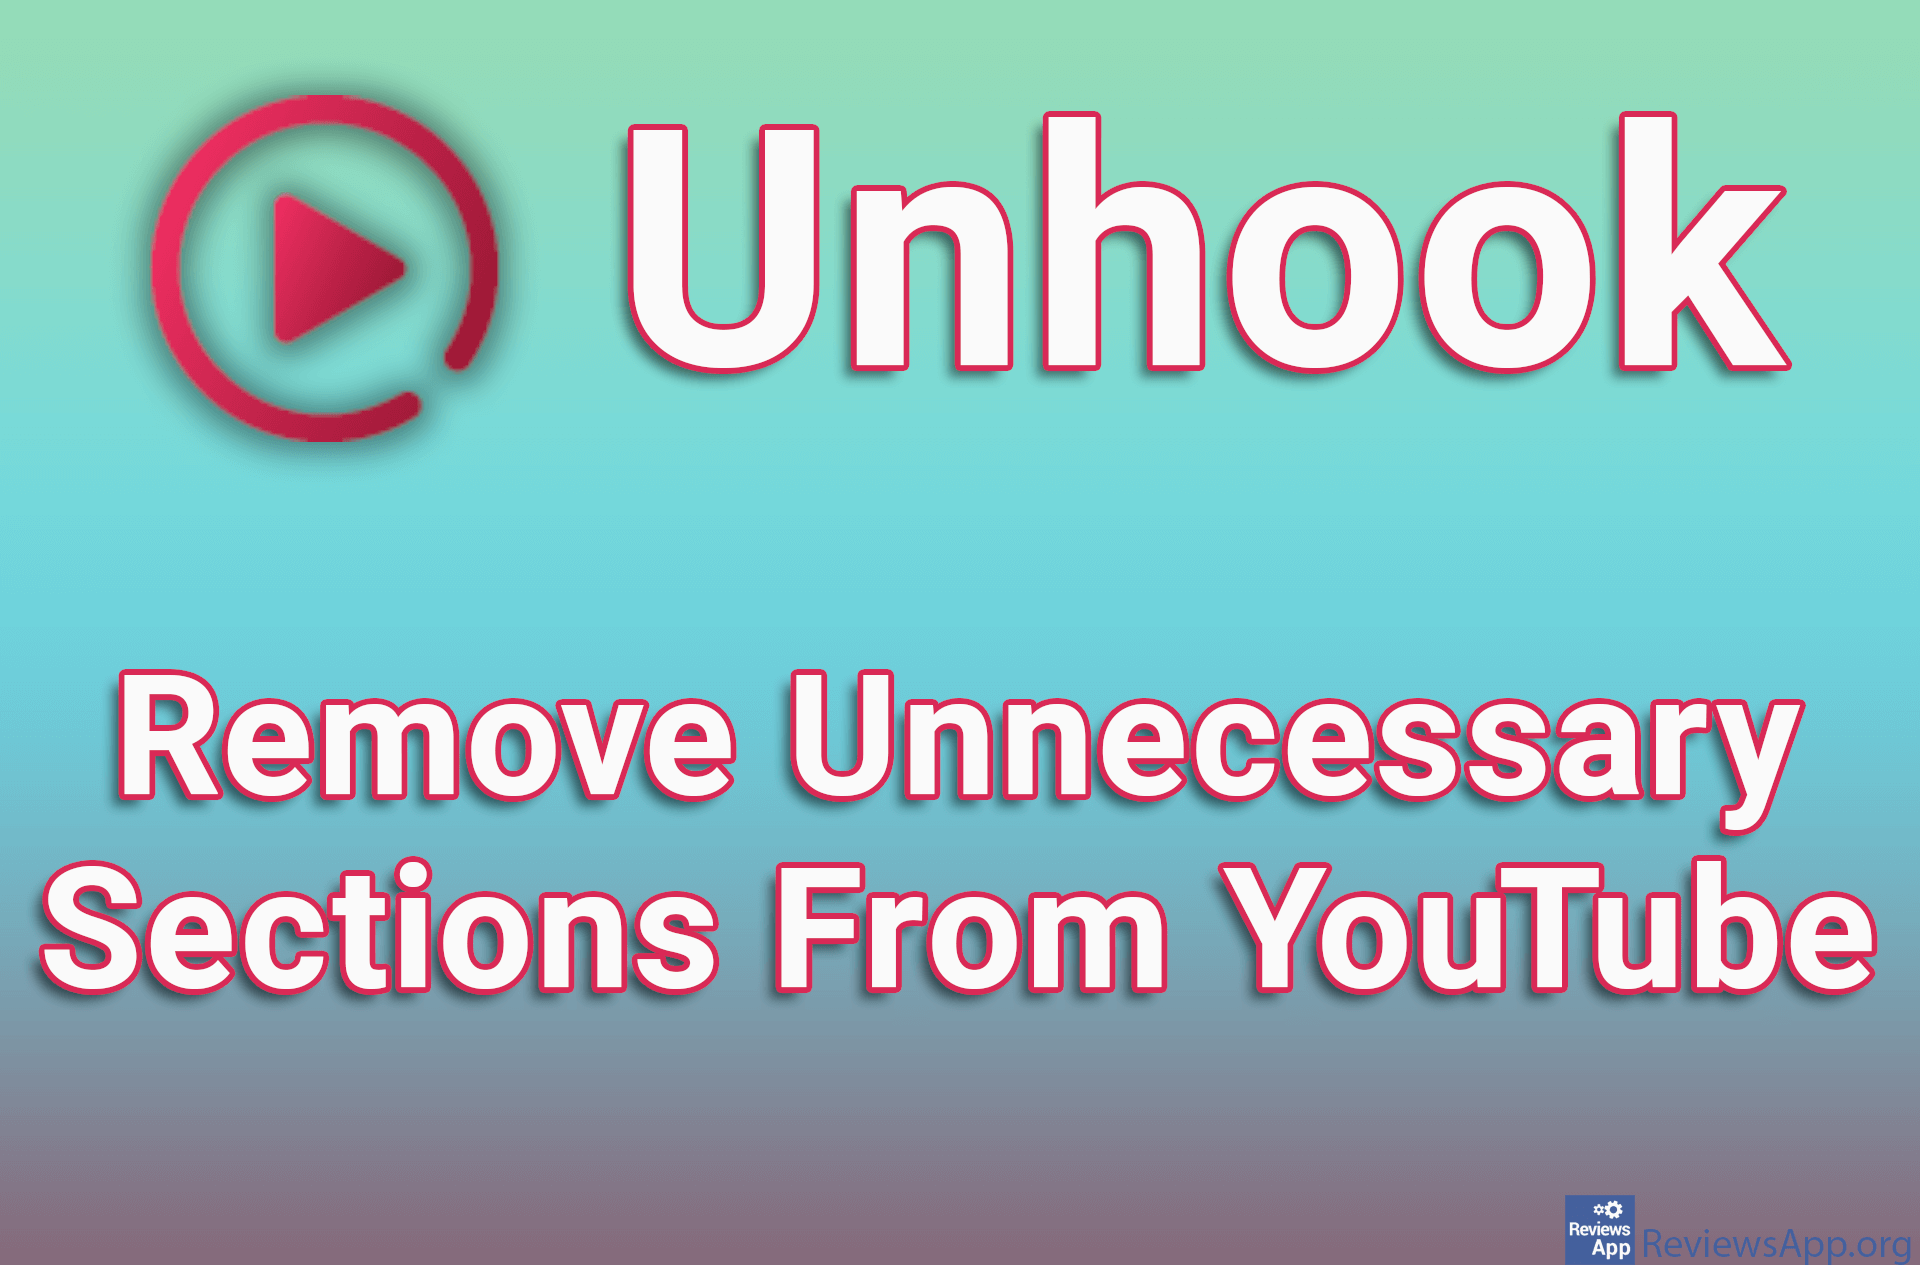 Unhook – Remove Unnecessary Sections From YouTube